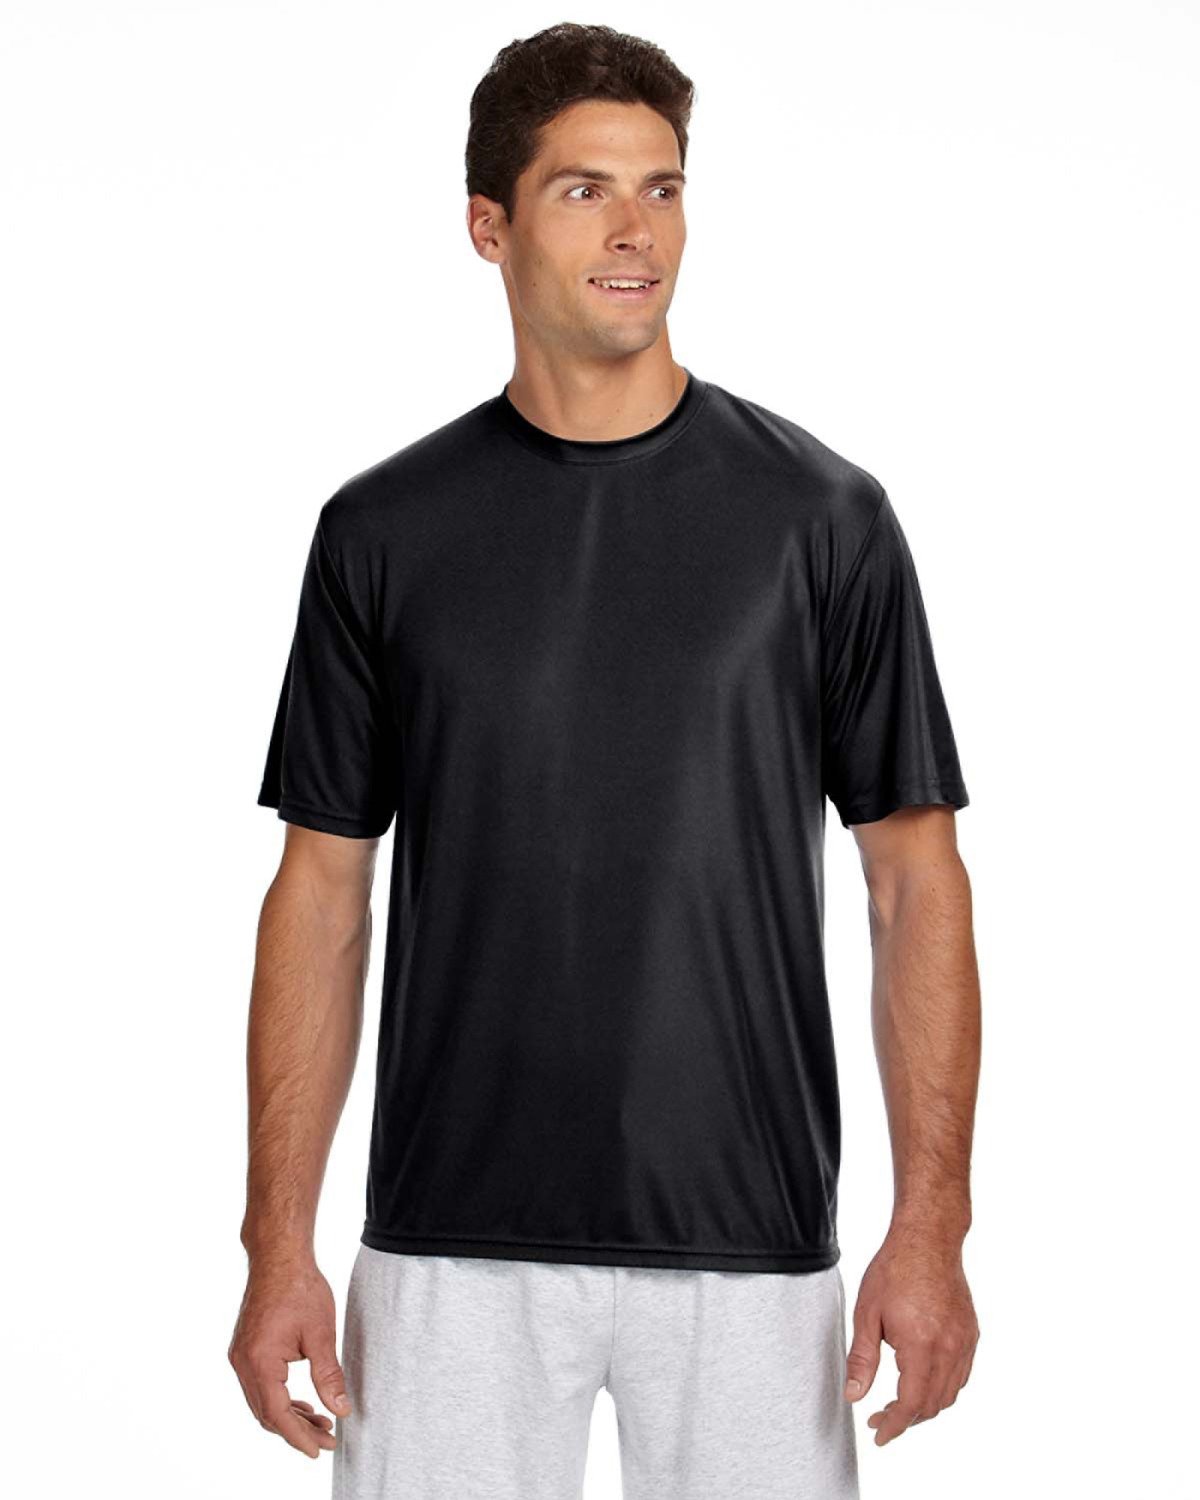 A4 Men's Cooling Performance T-Shirt, ty Yellow, Small